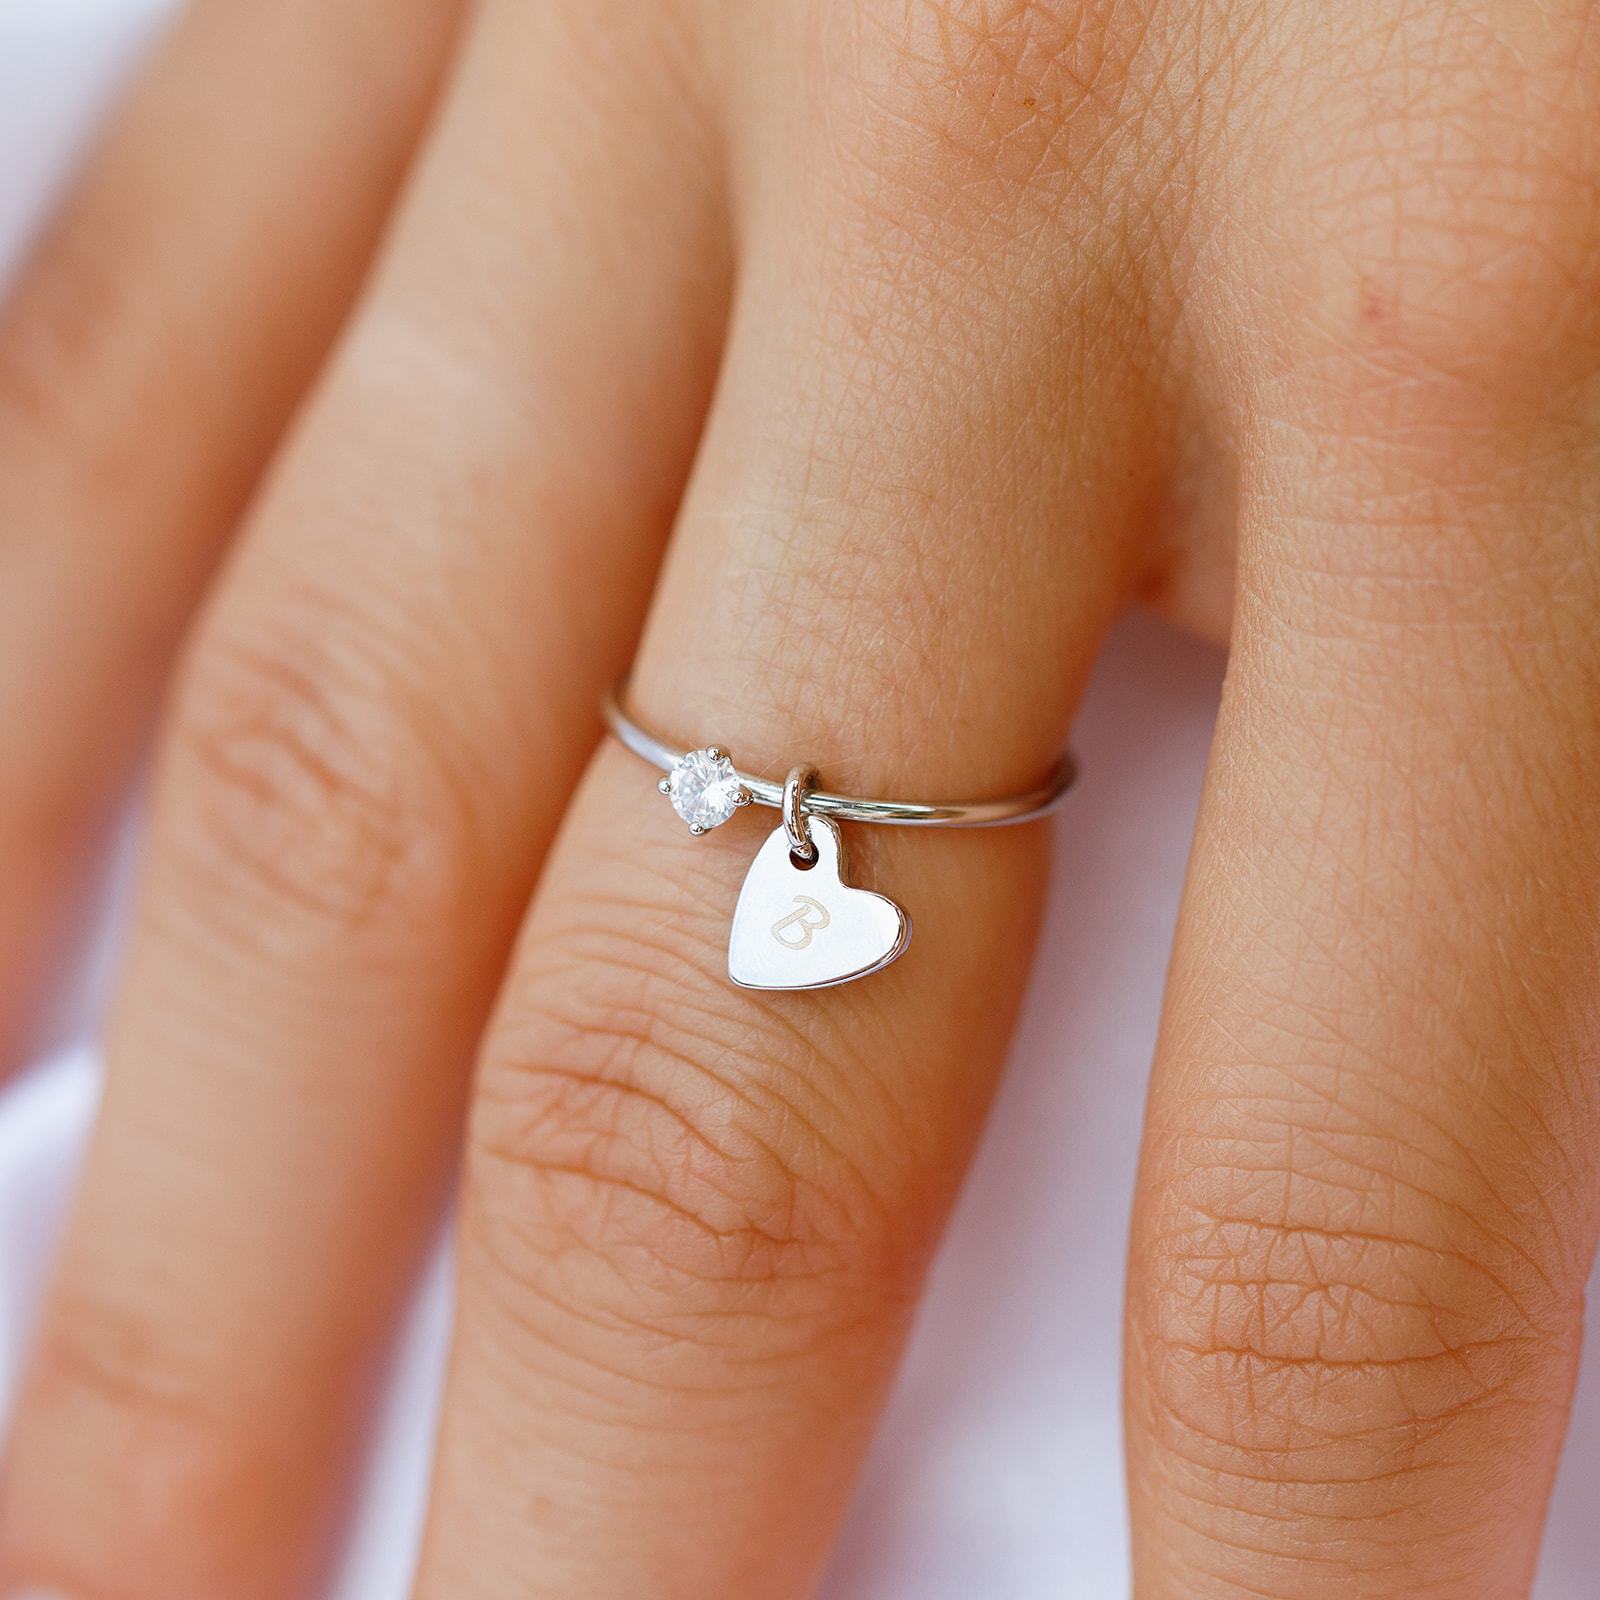 Personalized Birthstone Ring with Engraved Heart Pendant